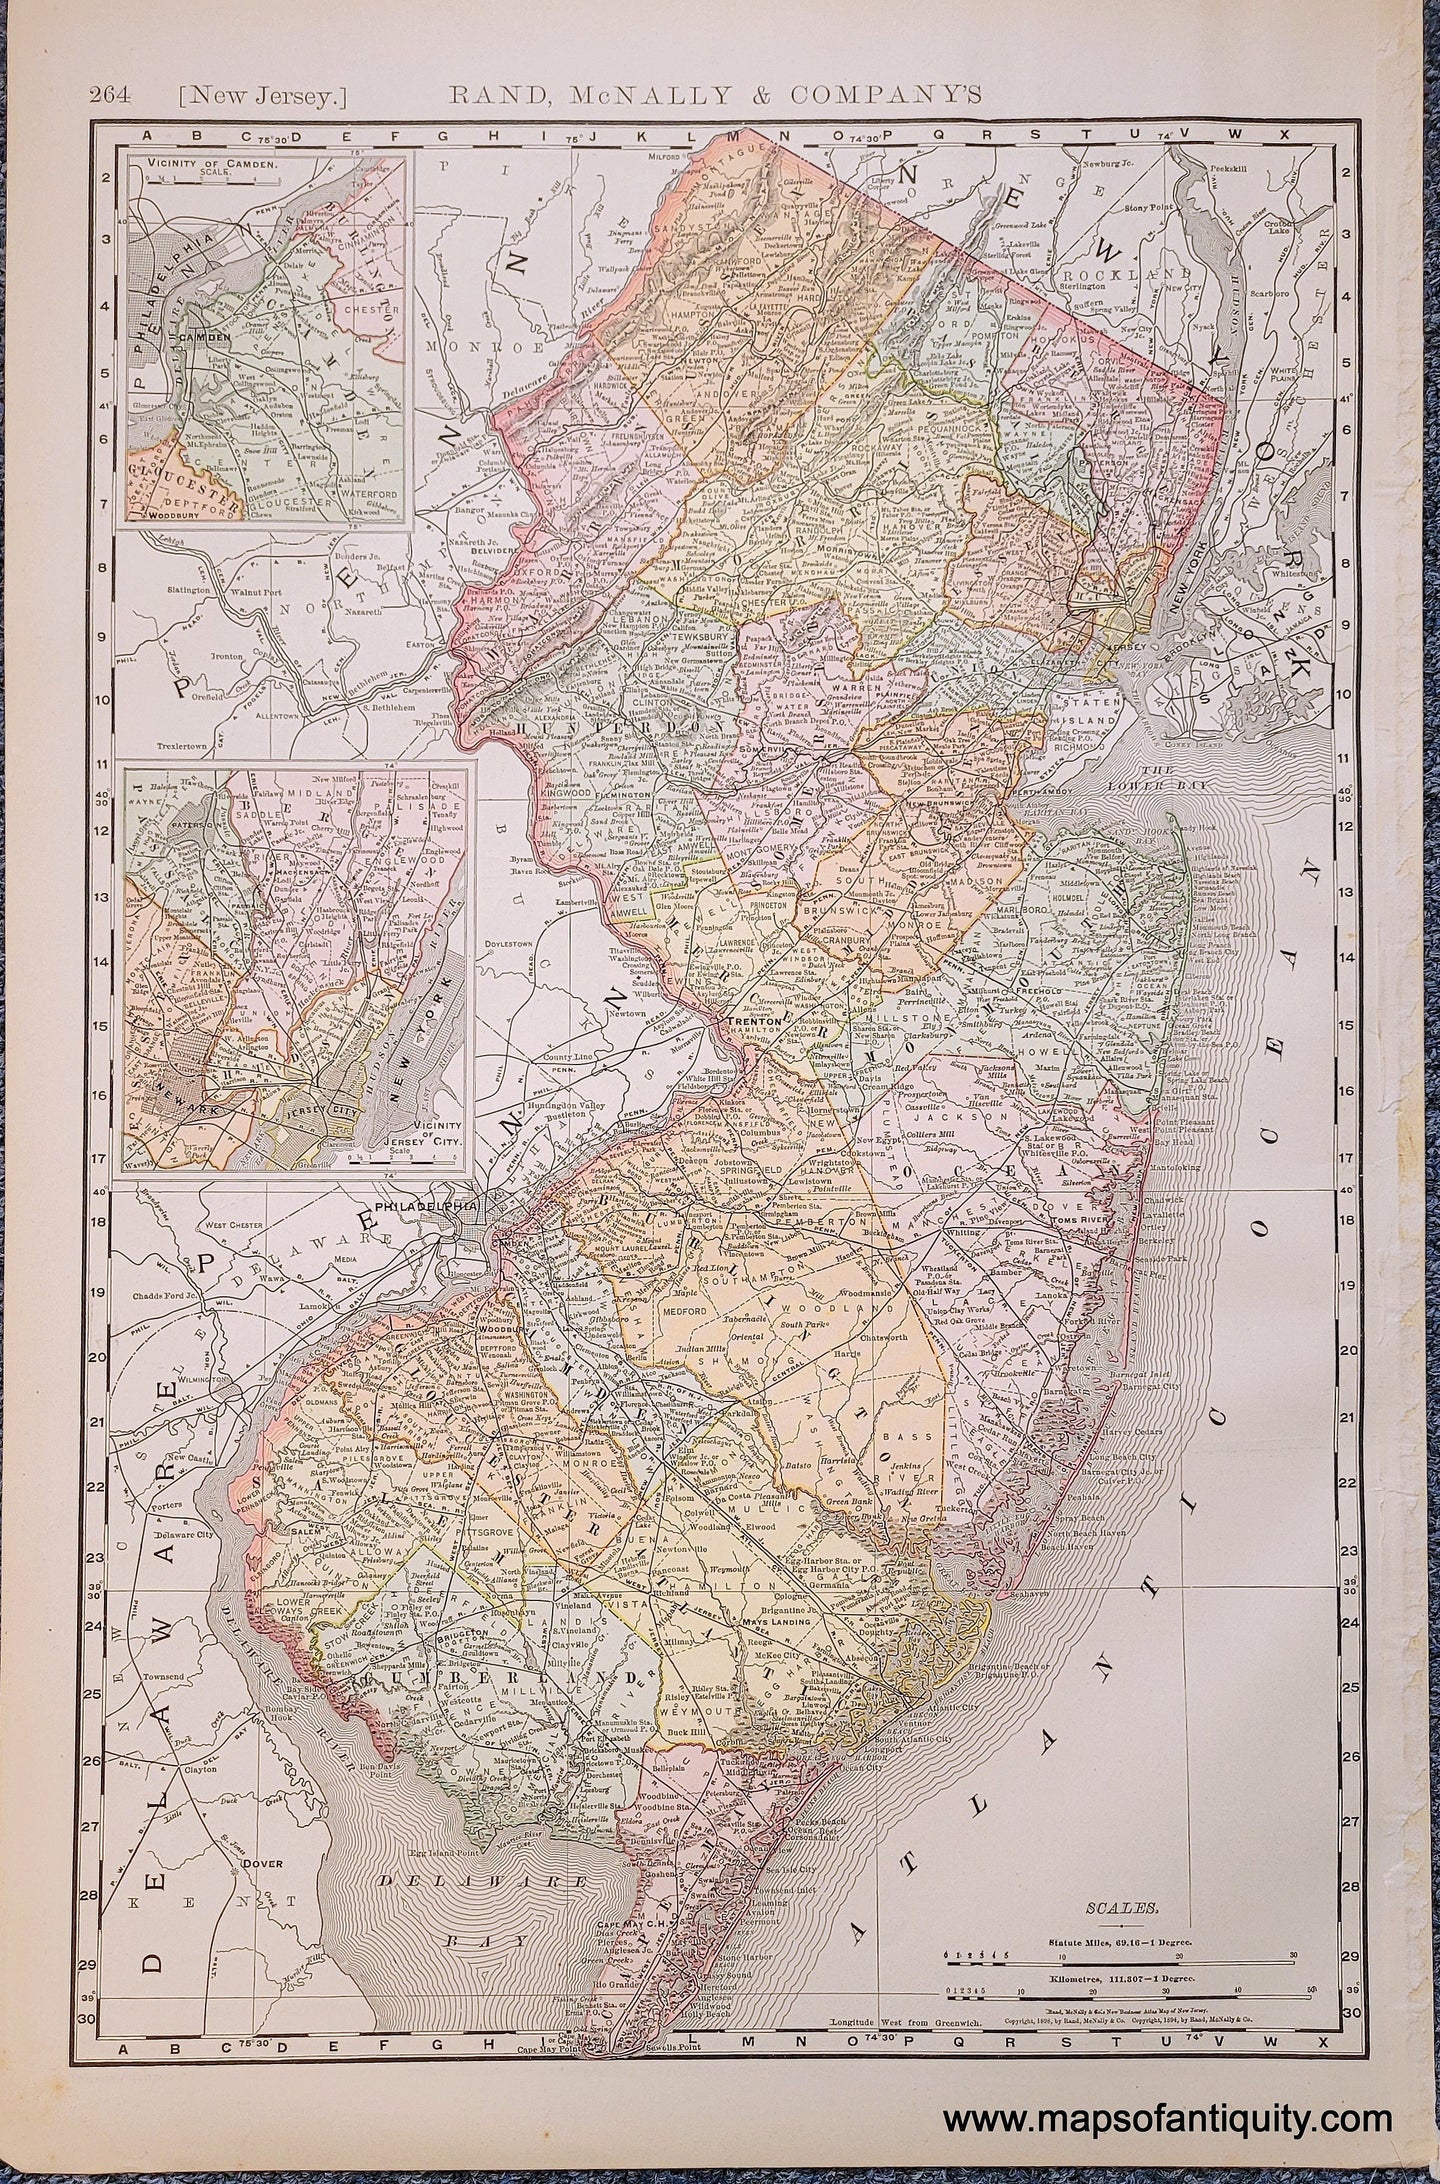 Antique map of New Jersey in vibrant antique colors of pastel yellow, orange, green, pink. Colored by county.